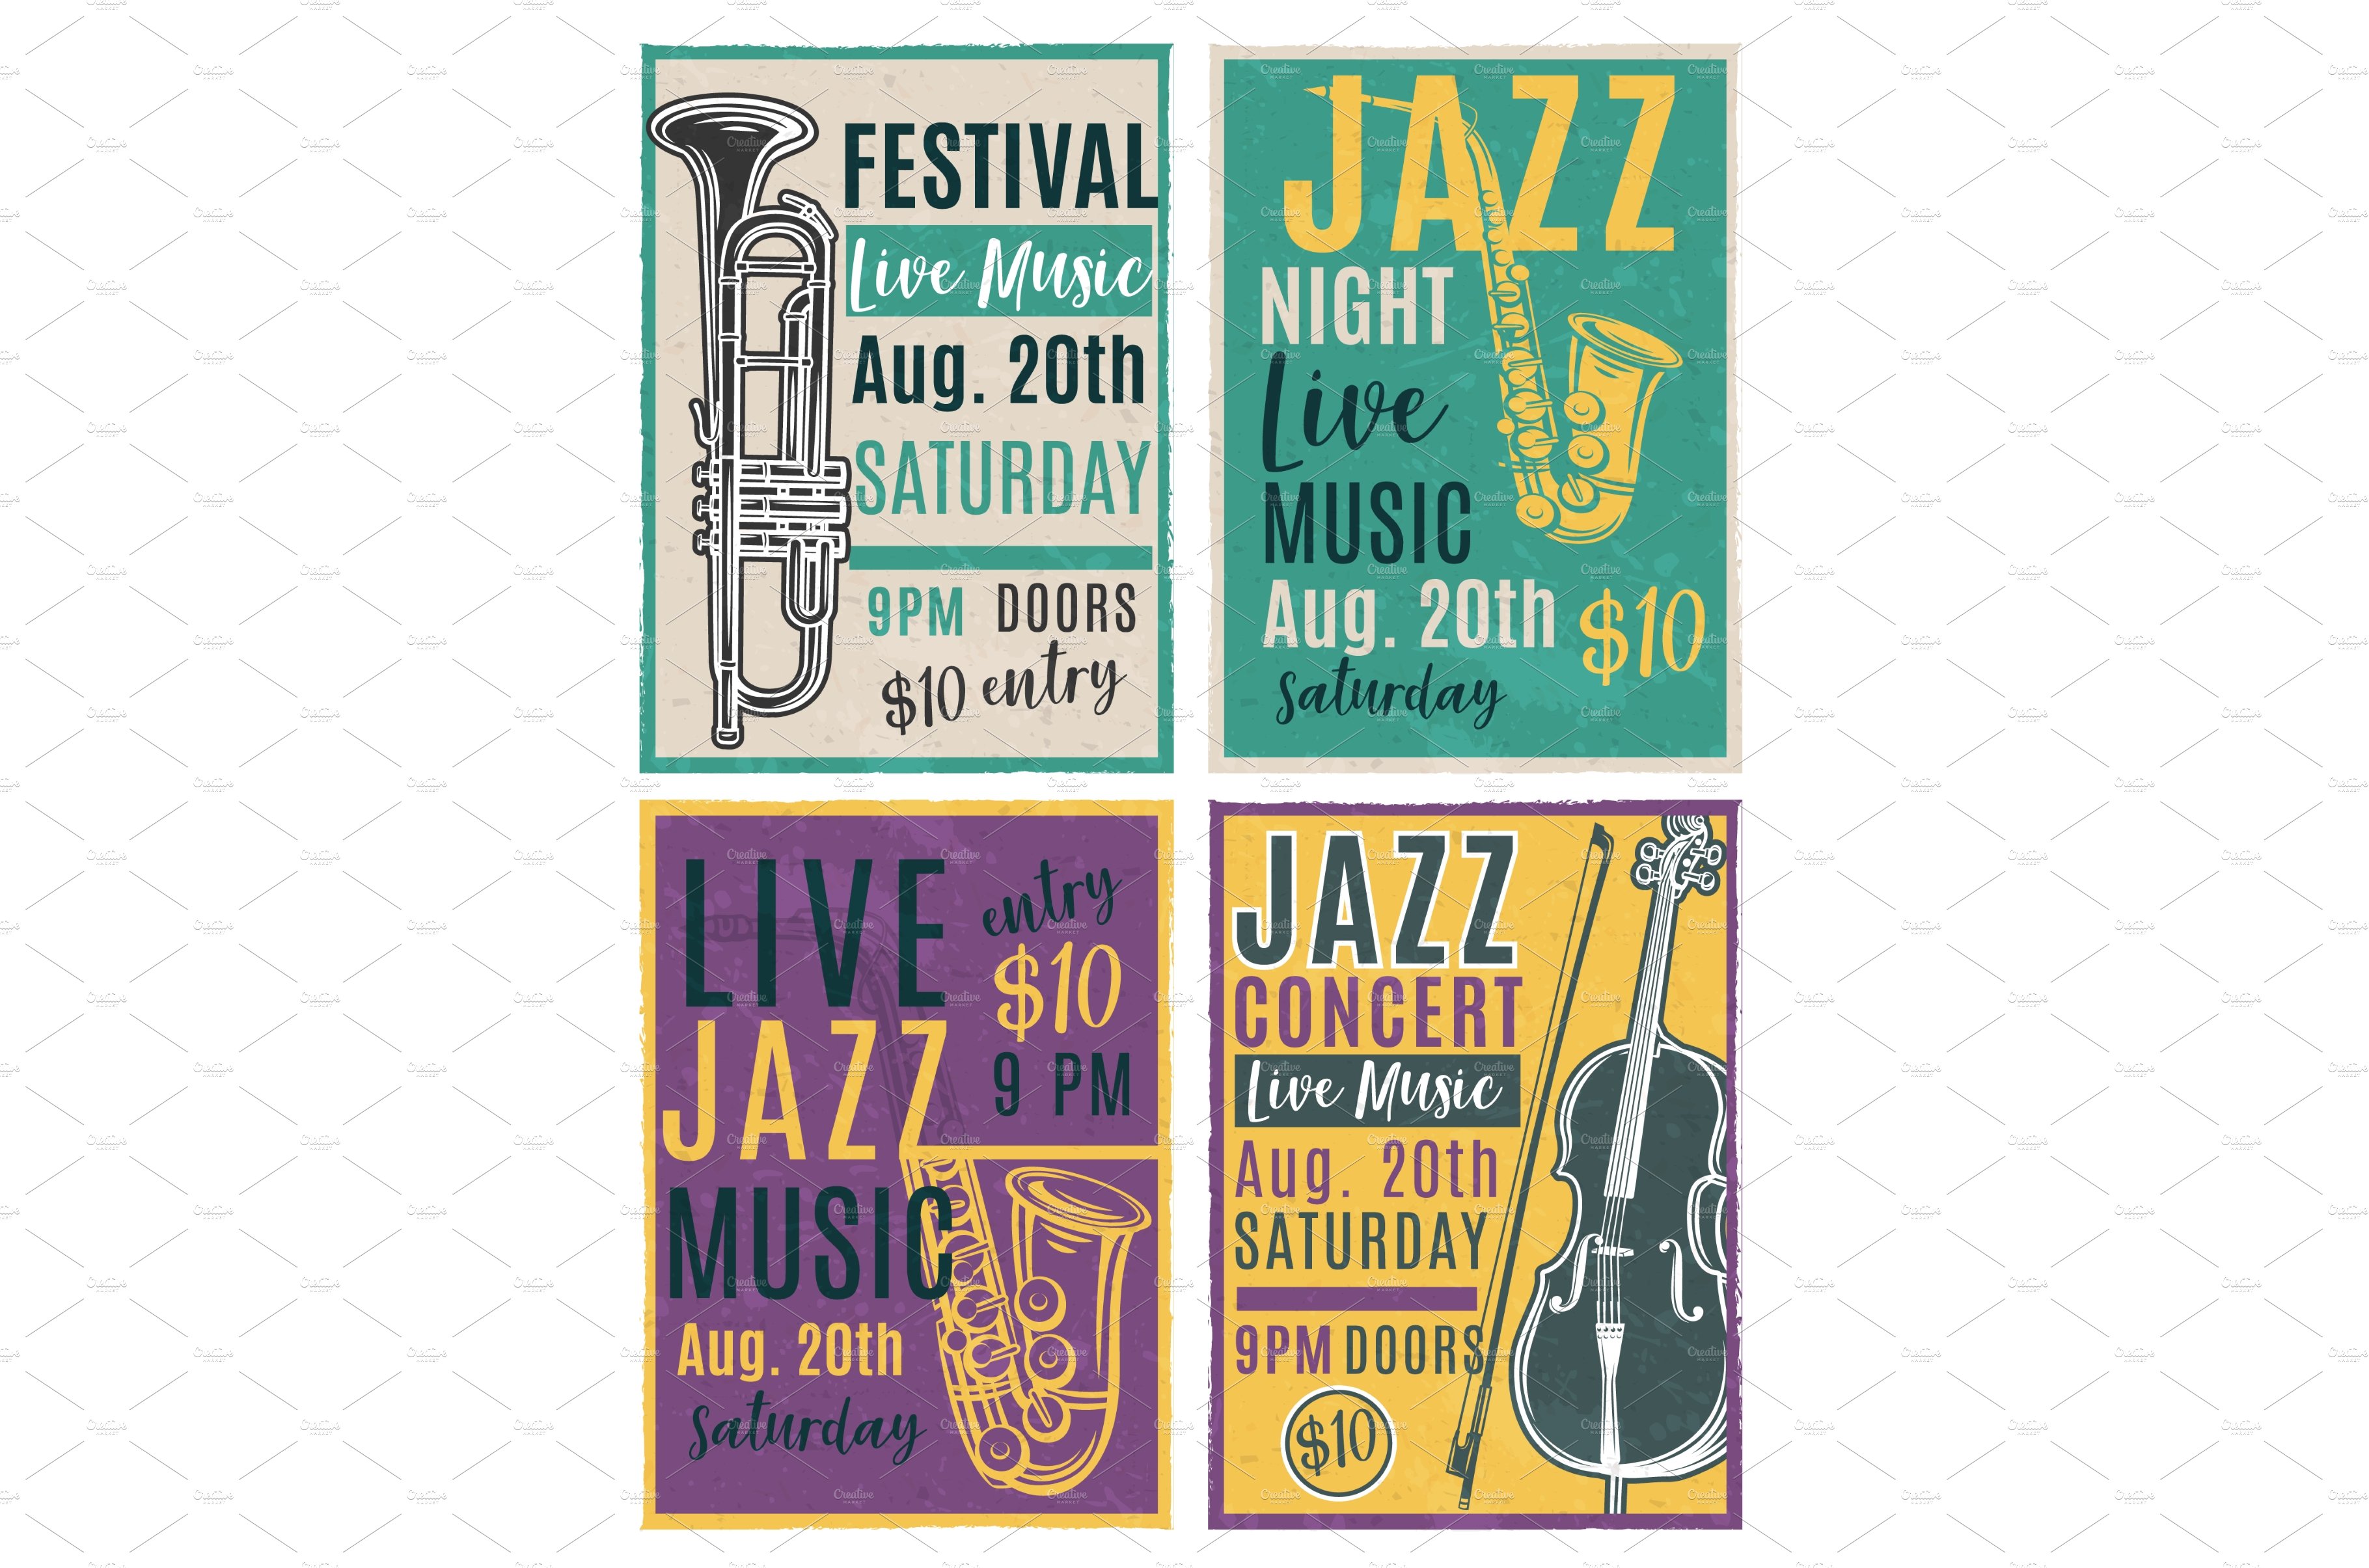 Jazz Festival Poster Template cover image.